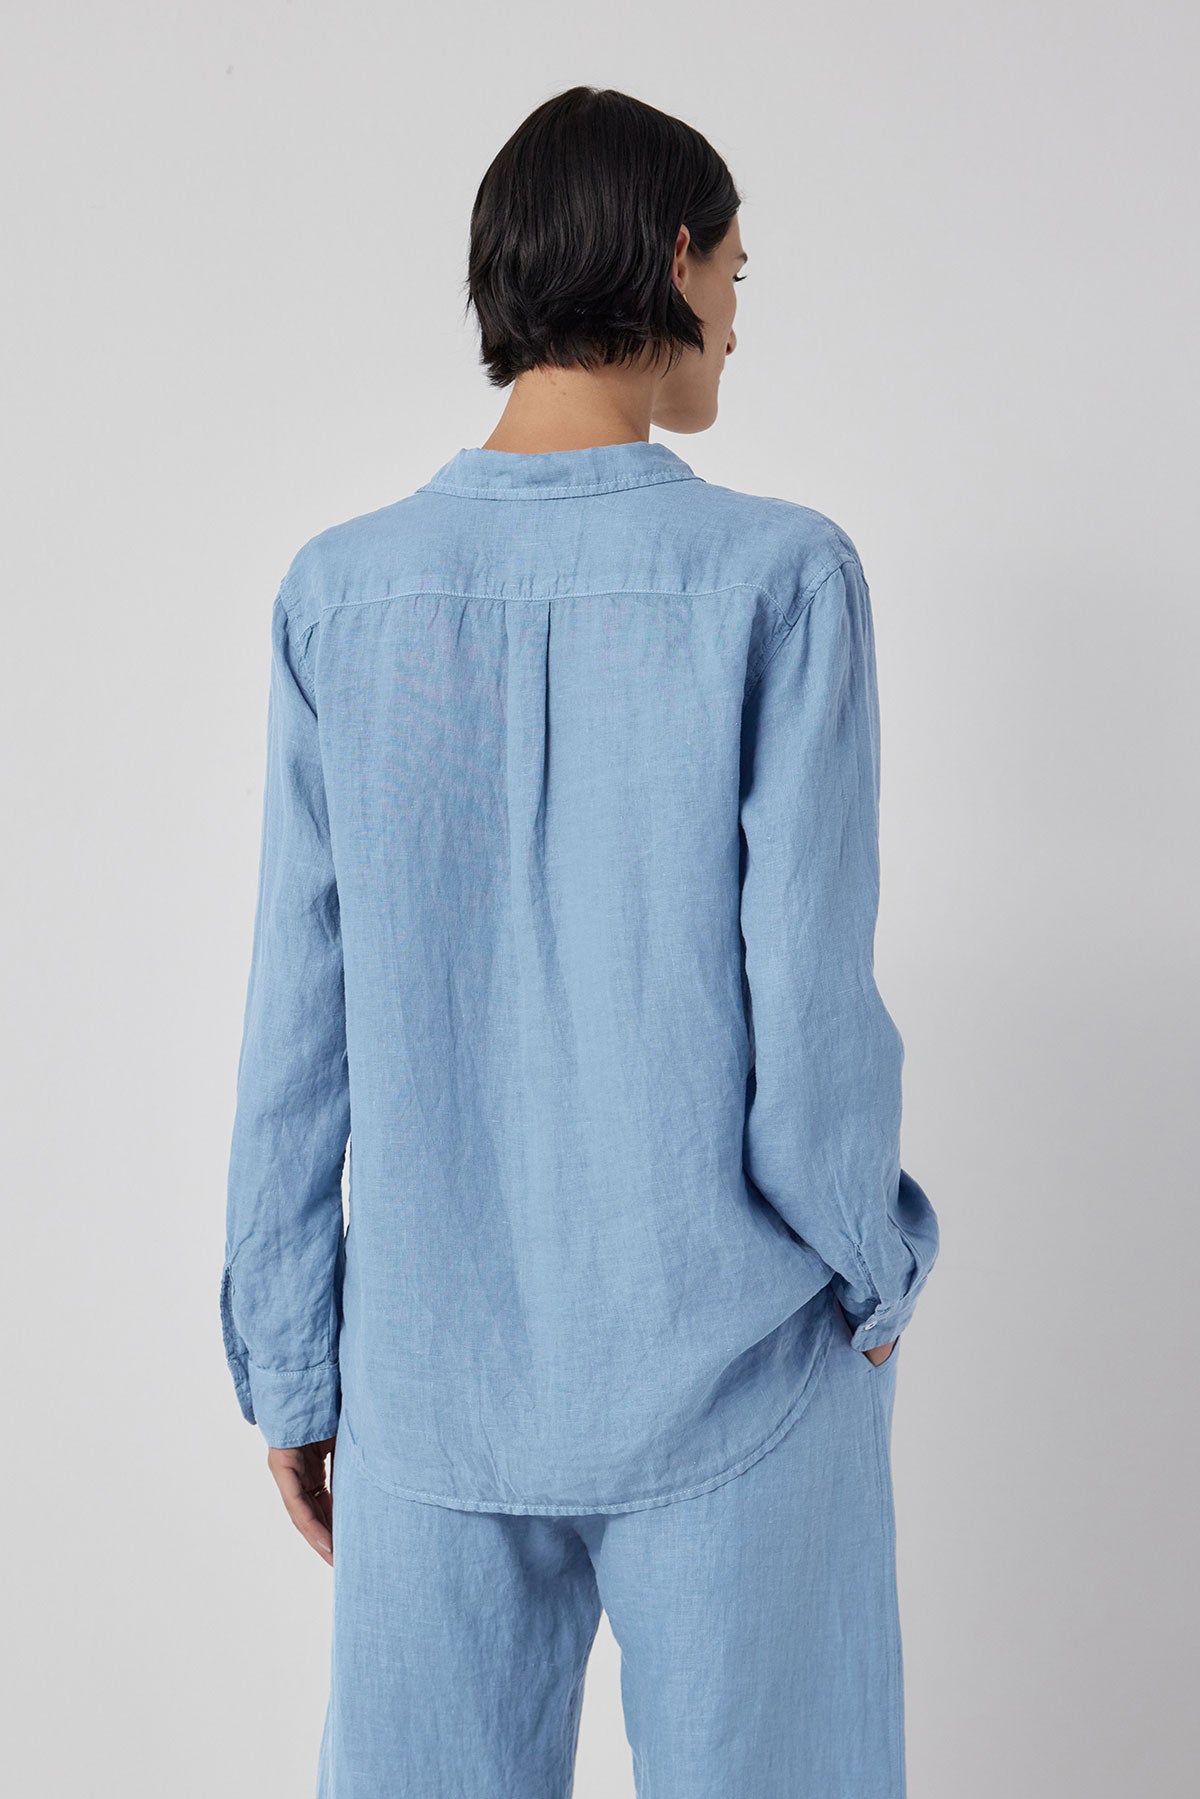 The woman is seen from the back in a blue linen Mulholland shirt and pants, showcasing a relaxed silhouette by Velvet by Jenny Graham.-36212599390401